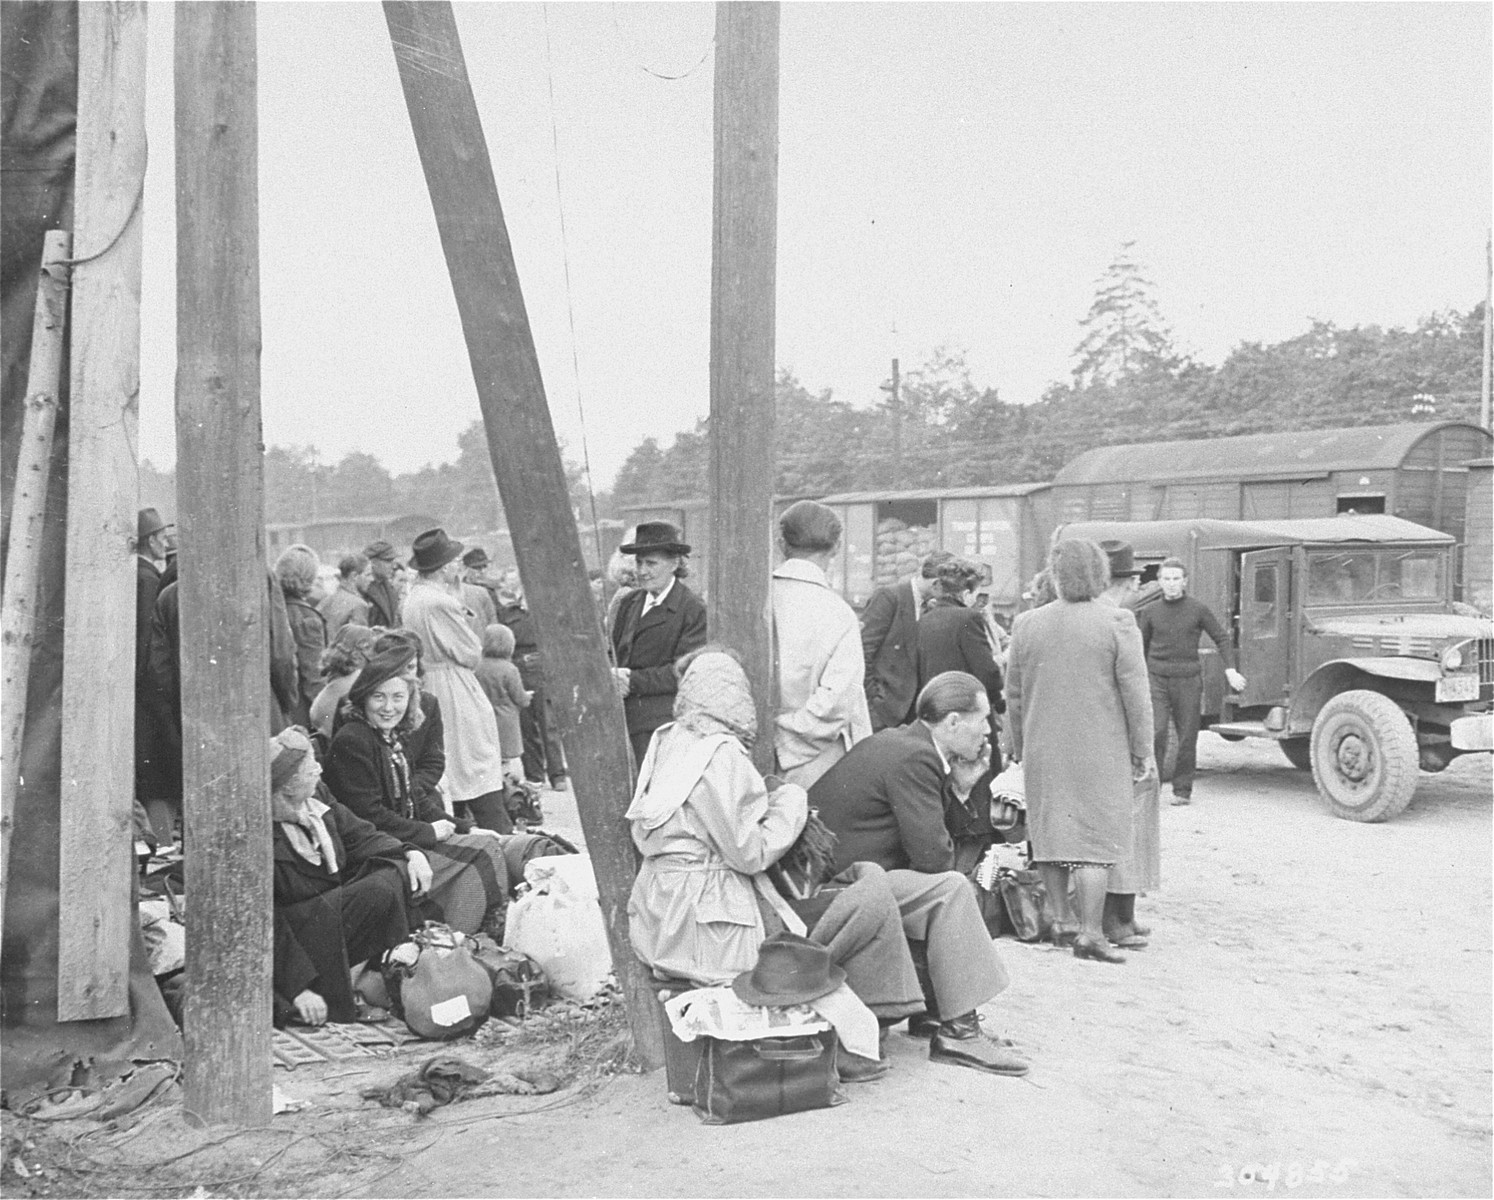 Jewish DPs who have been evacuated from Berlin to Frankfurt as a result of the Soviet blockade, wait at the Rhine Main Airfield for transport to displaced persons camps.

The original caption reads, "Jewish displaced persons arrive by plane at the Rhine Main Airfield, Frankfurt, Germany, from the blockaded city of Berlin, on operation "Vittles". 150 came in the first group, and 180 are expected to arrive on July 24, 1948. Most of these DPs have been granted visas by the new State of Israel, and will go to DP camps in the U.S. zone to await shipment to Palestine, while others will leave for Canada, France and the U.S.. Here DPs wait for trucks to arrive to carry them to trains."